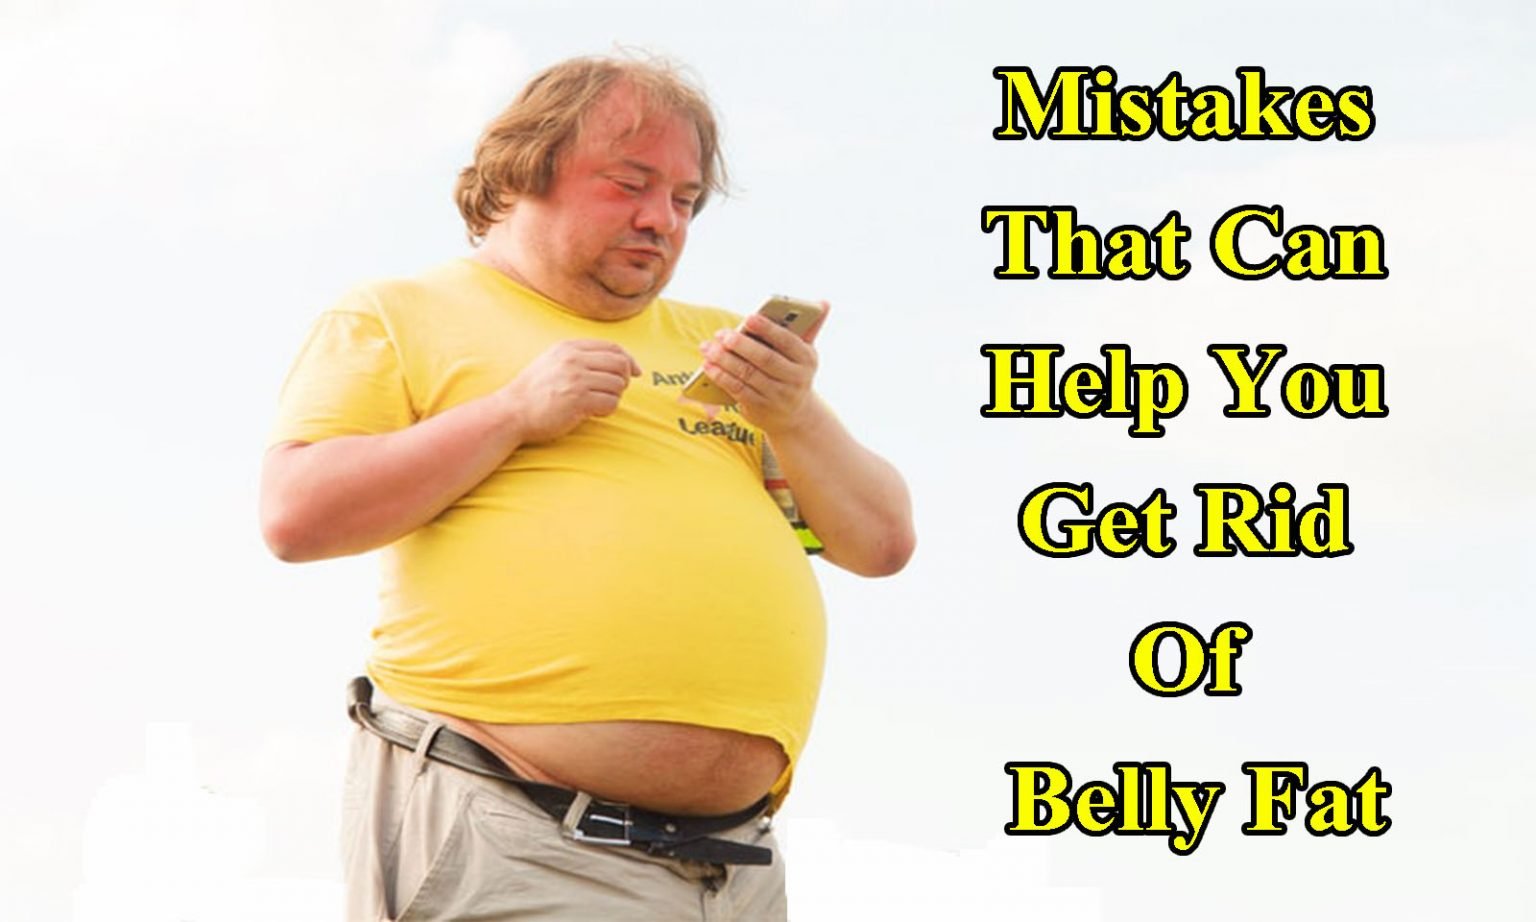 [Mistakes] That Can Help You Get Rid Of Belly Fat